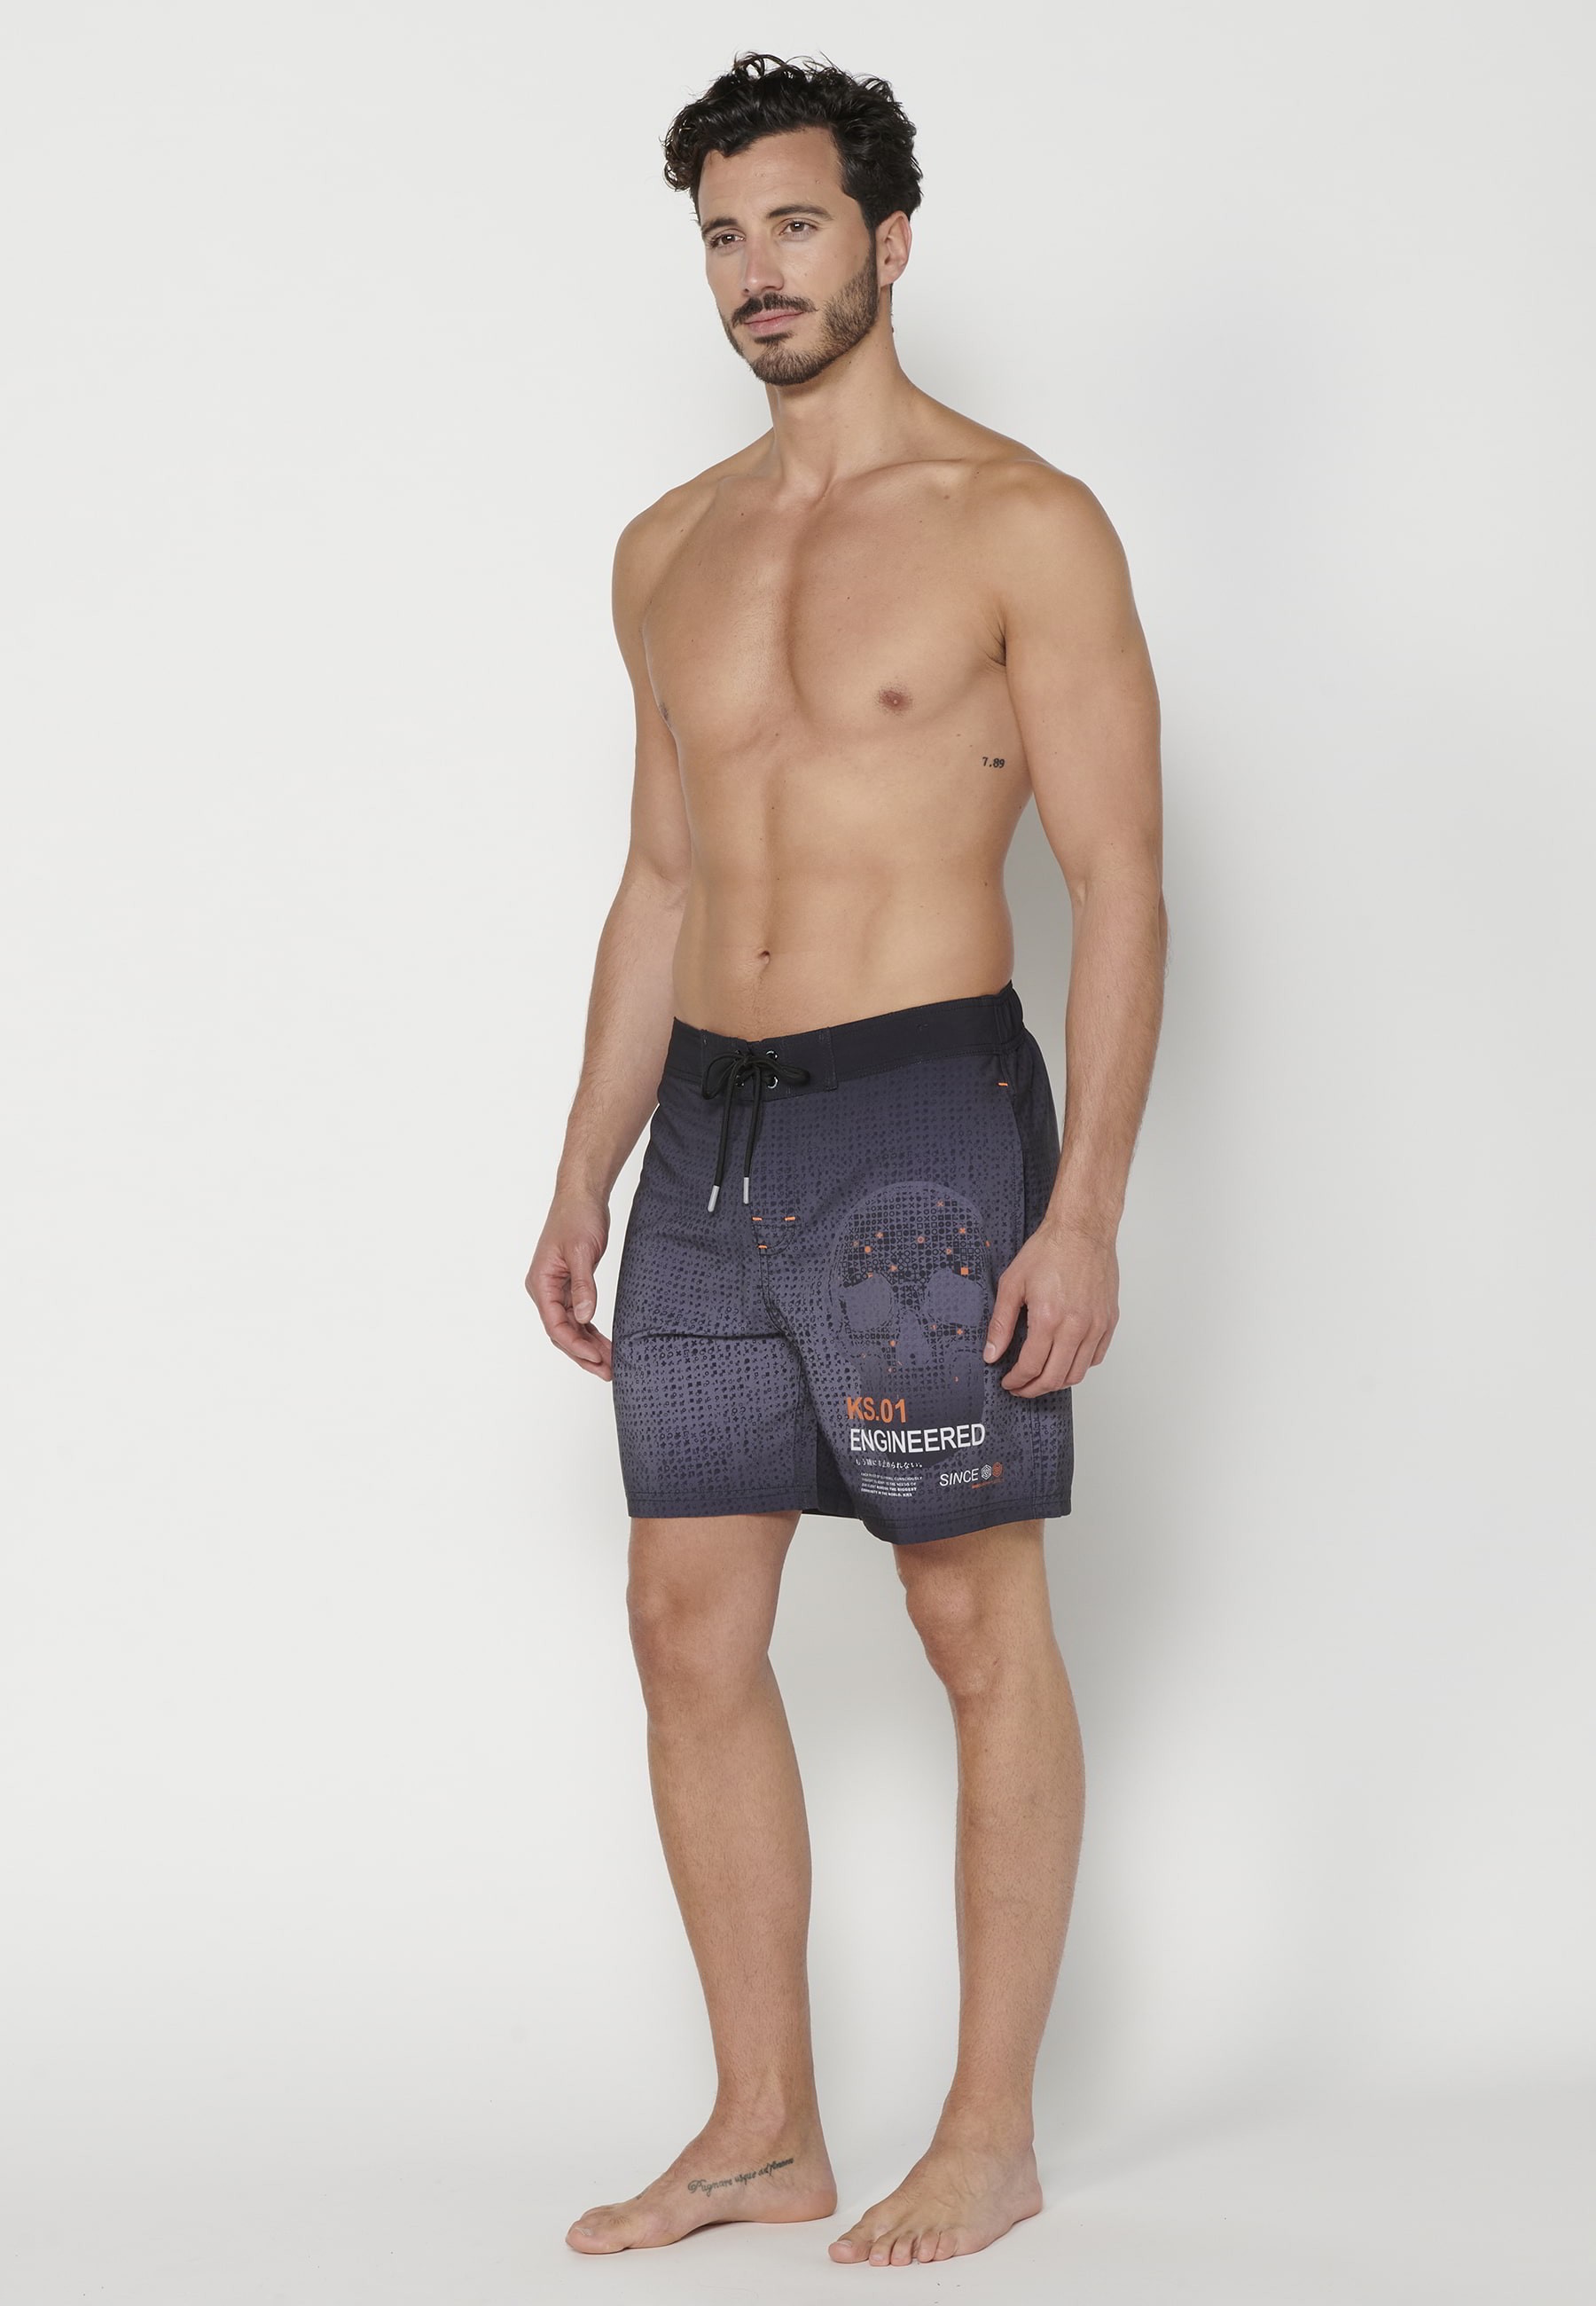 Short Surfer-style swimsuit with three Pockets in Gray color for Men